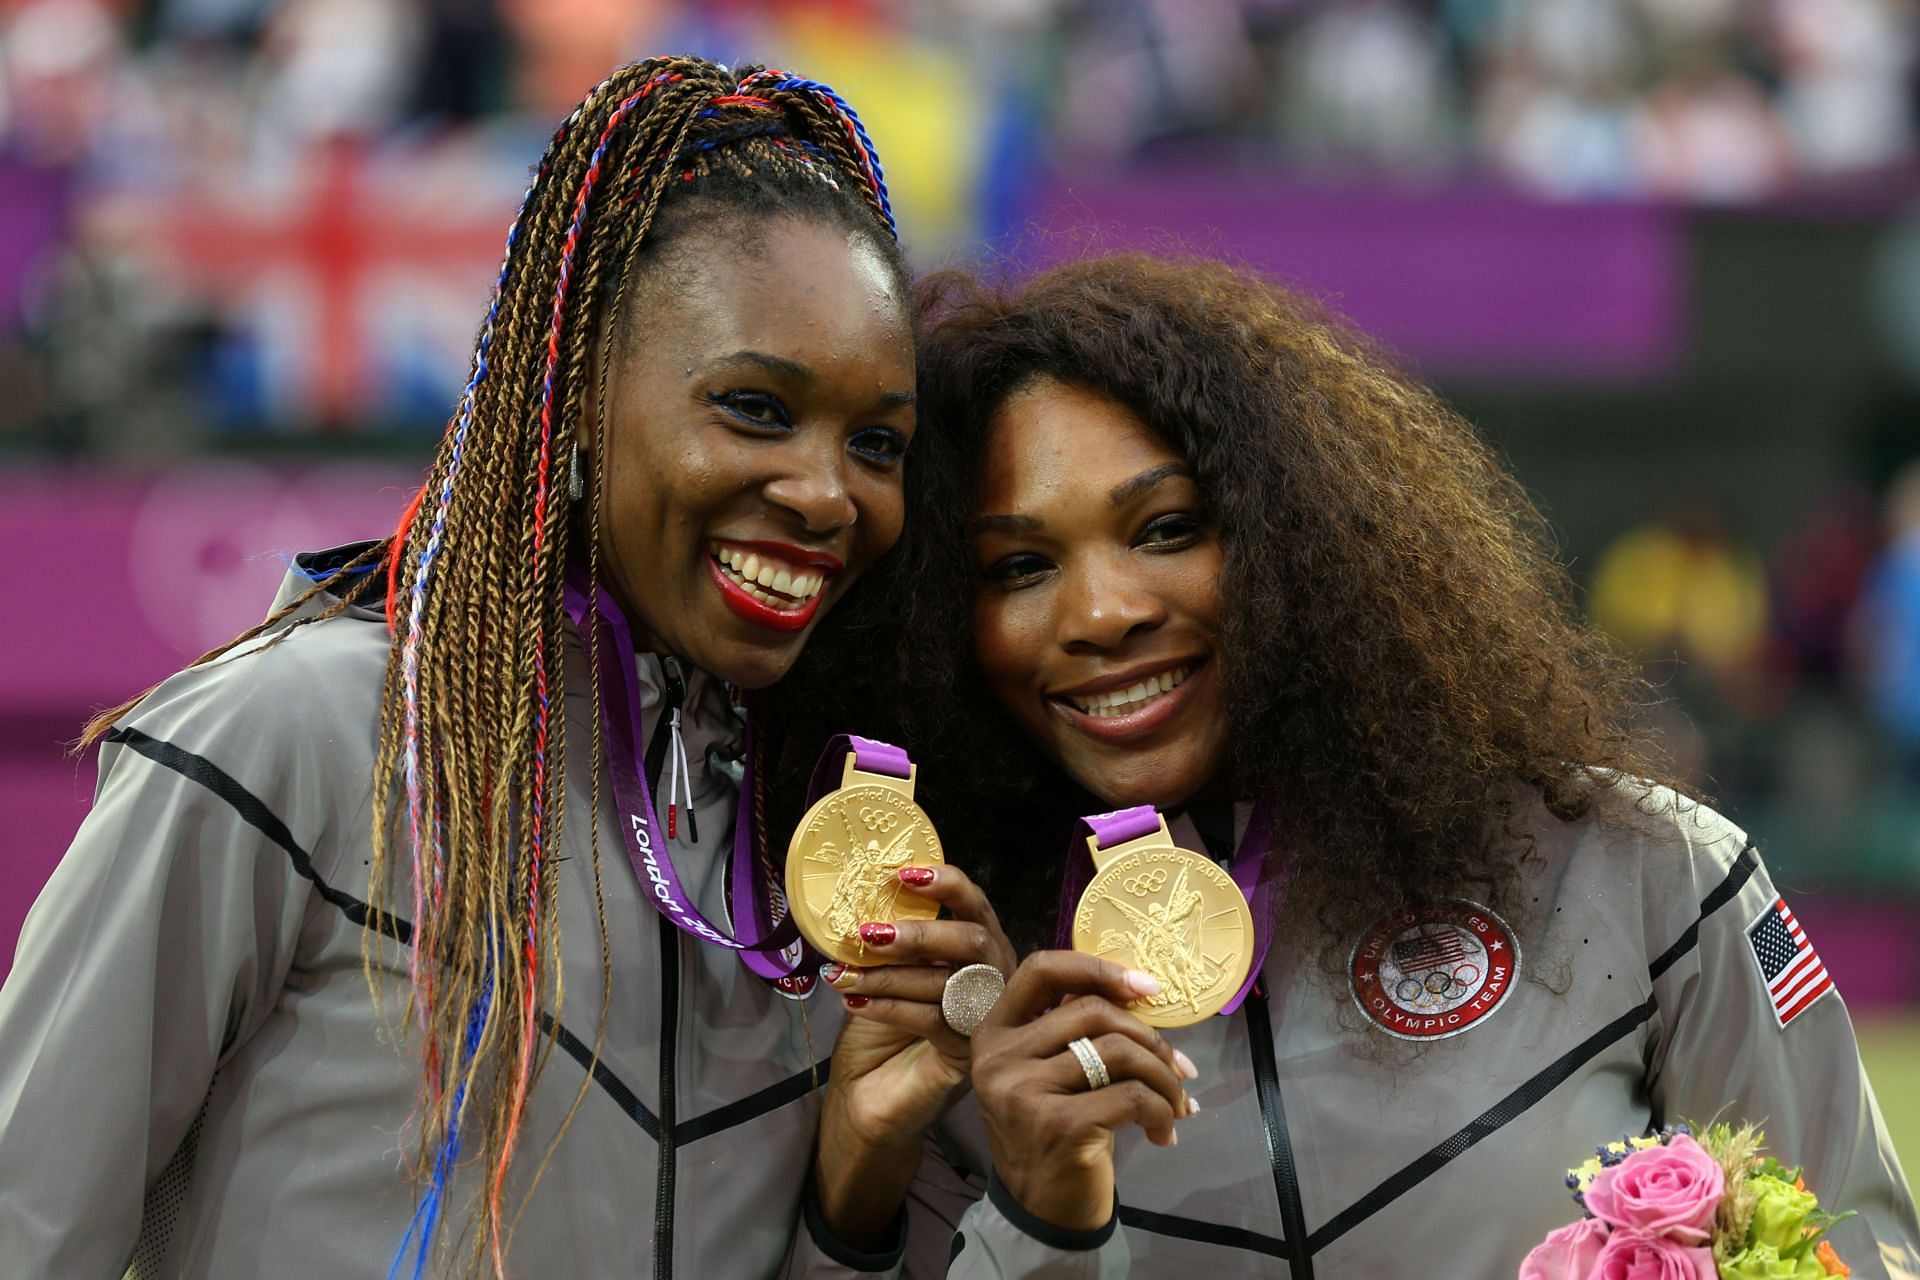 Venus and Serena Williams won the gold medal in doubles at the London Olympics